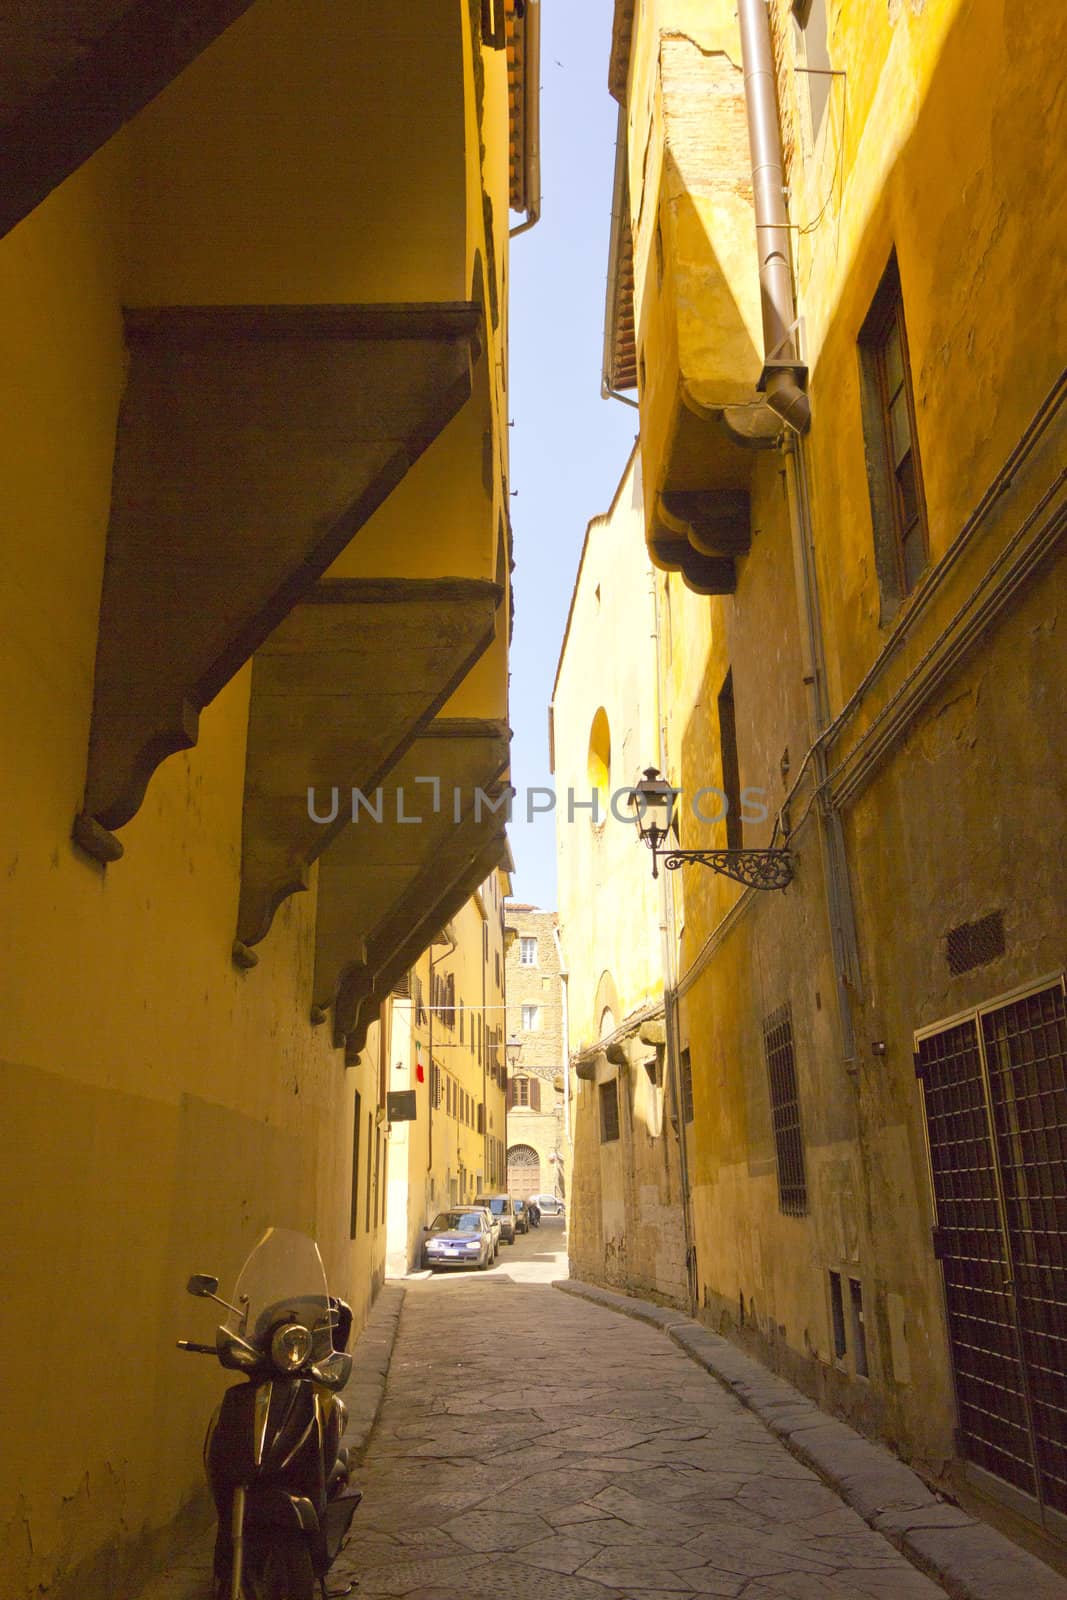 Narrow alley with old buildings in Florence Italy.